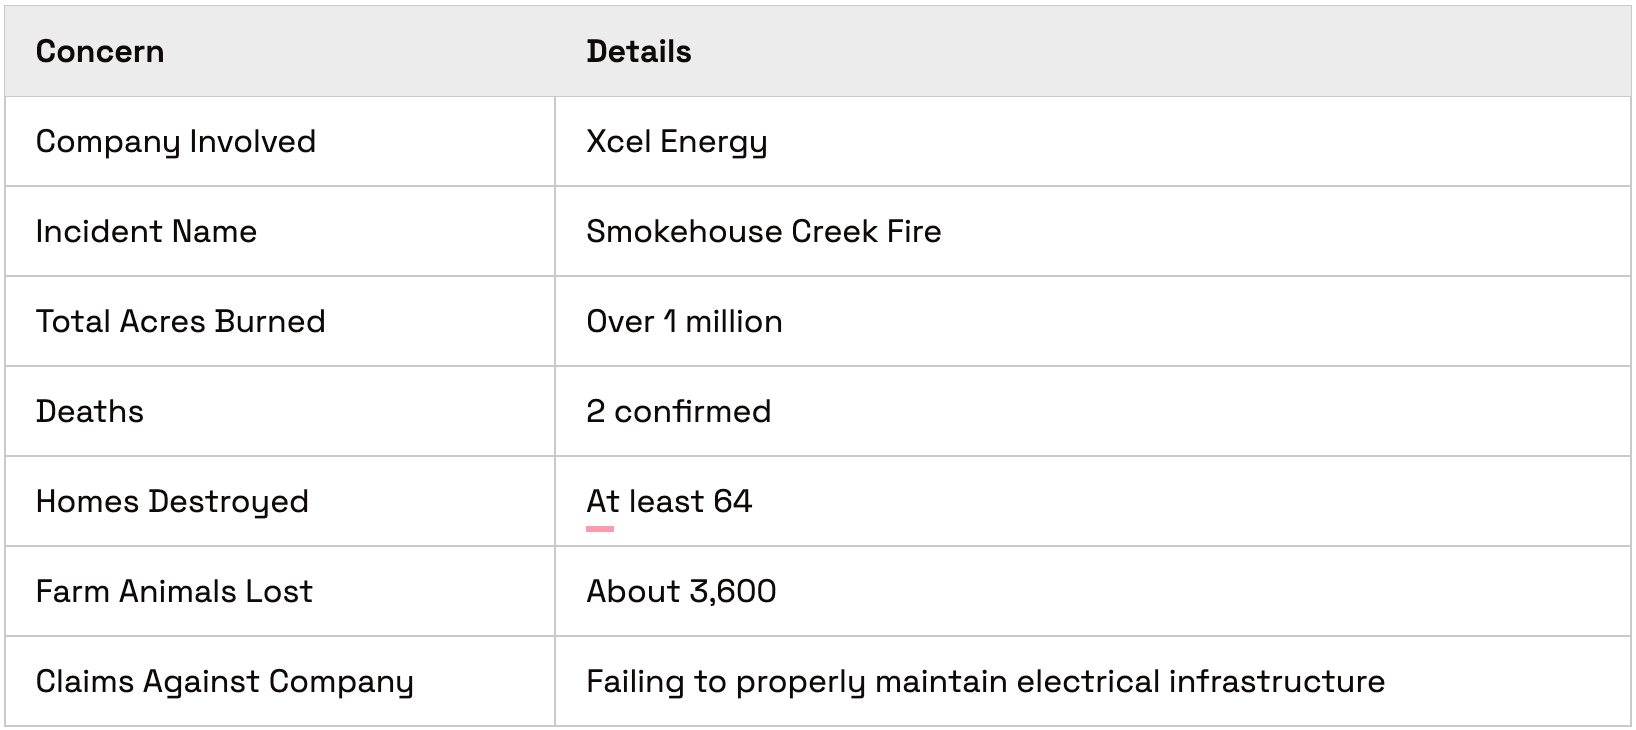 Company Involved	Xcel Energy
Incident Name	Smokehouse Creek Fire
Total Acres Burned	Over 1 million
Deaths	2 confirmed
Homes Destroyed	At least 64
Farm Animals Lost	About 3,600
Claims Against Company	Failing to properly maintain electrical infrastructure